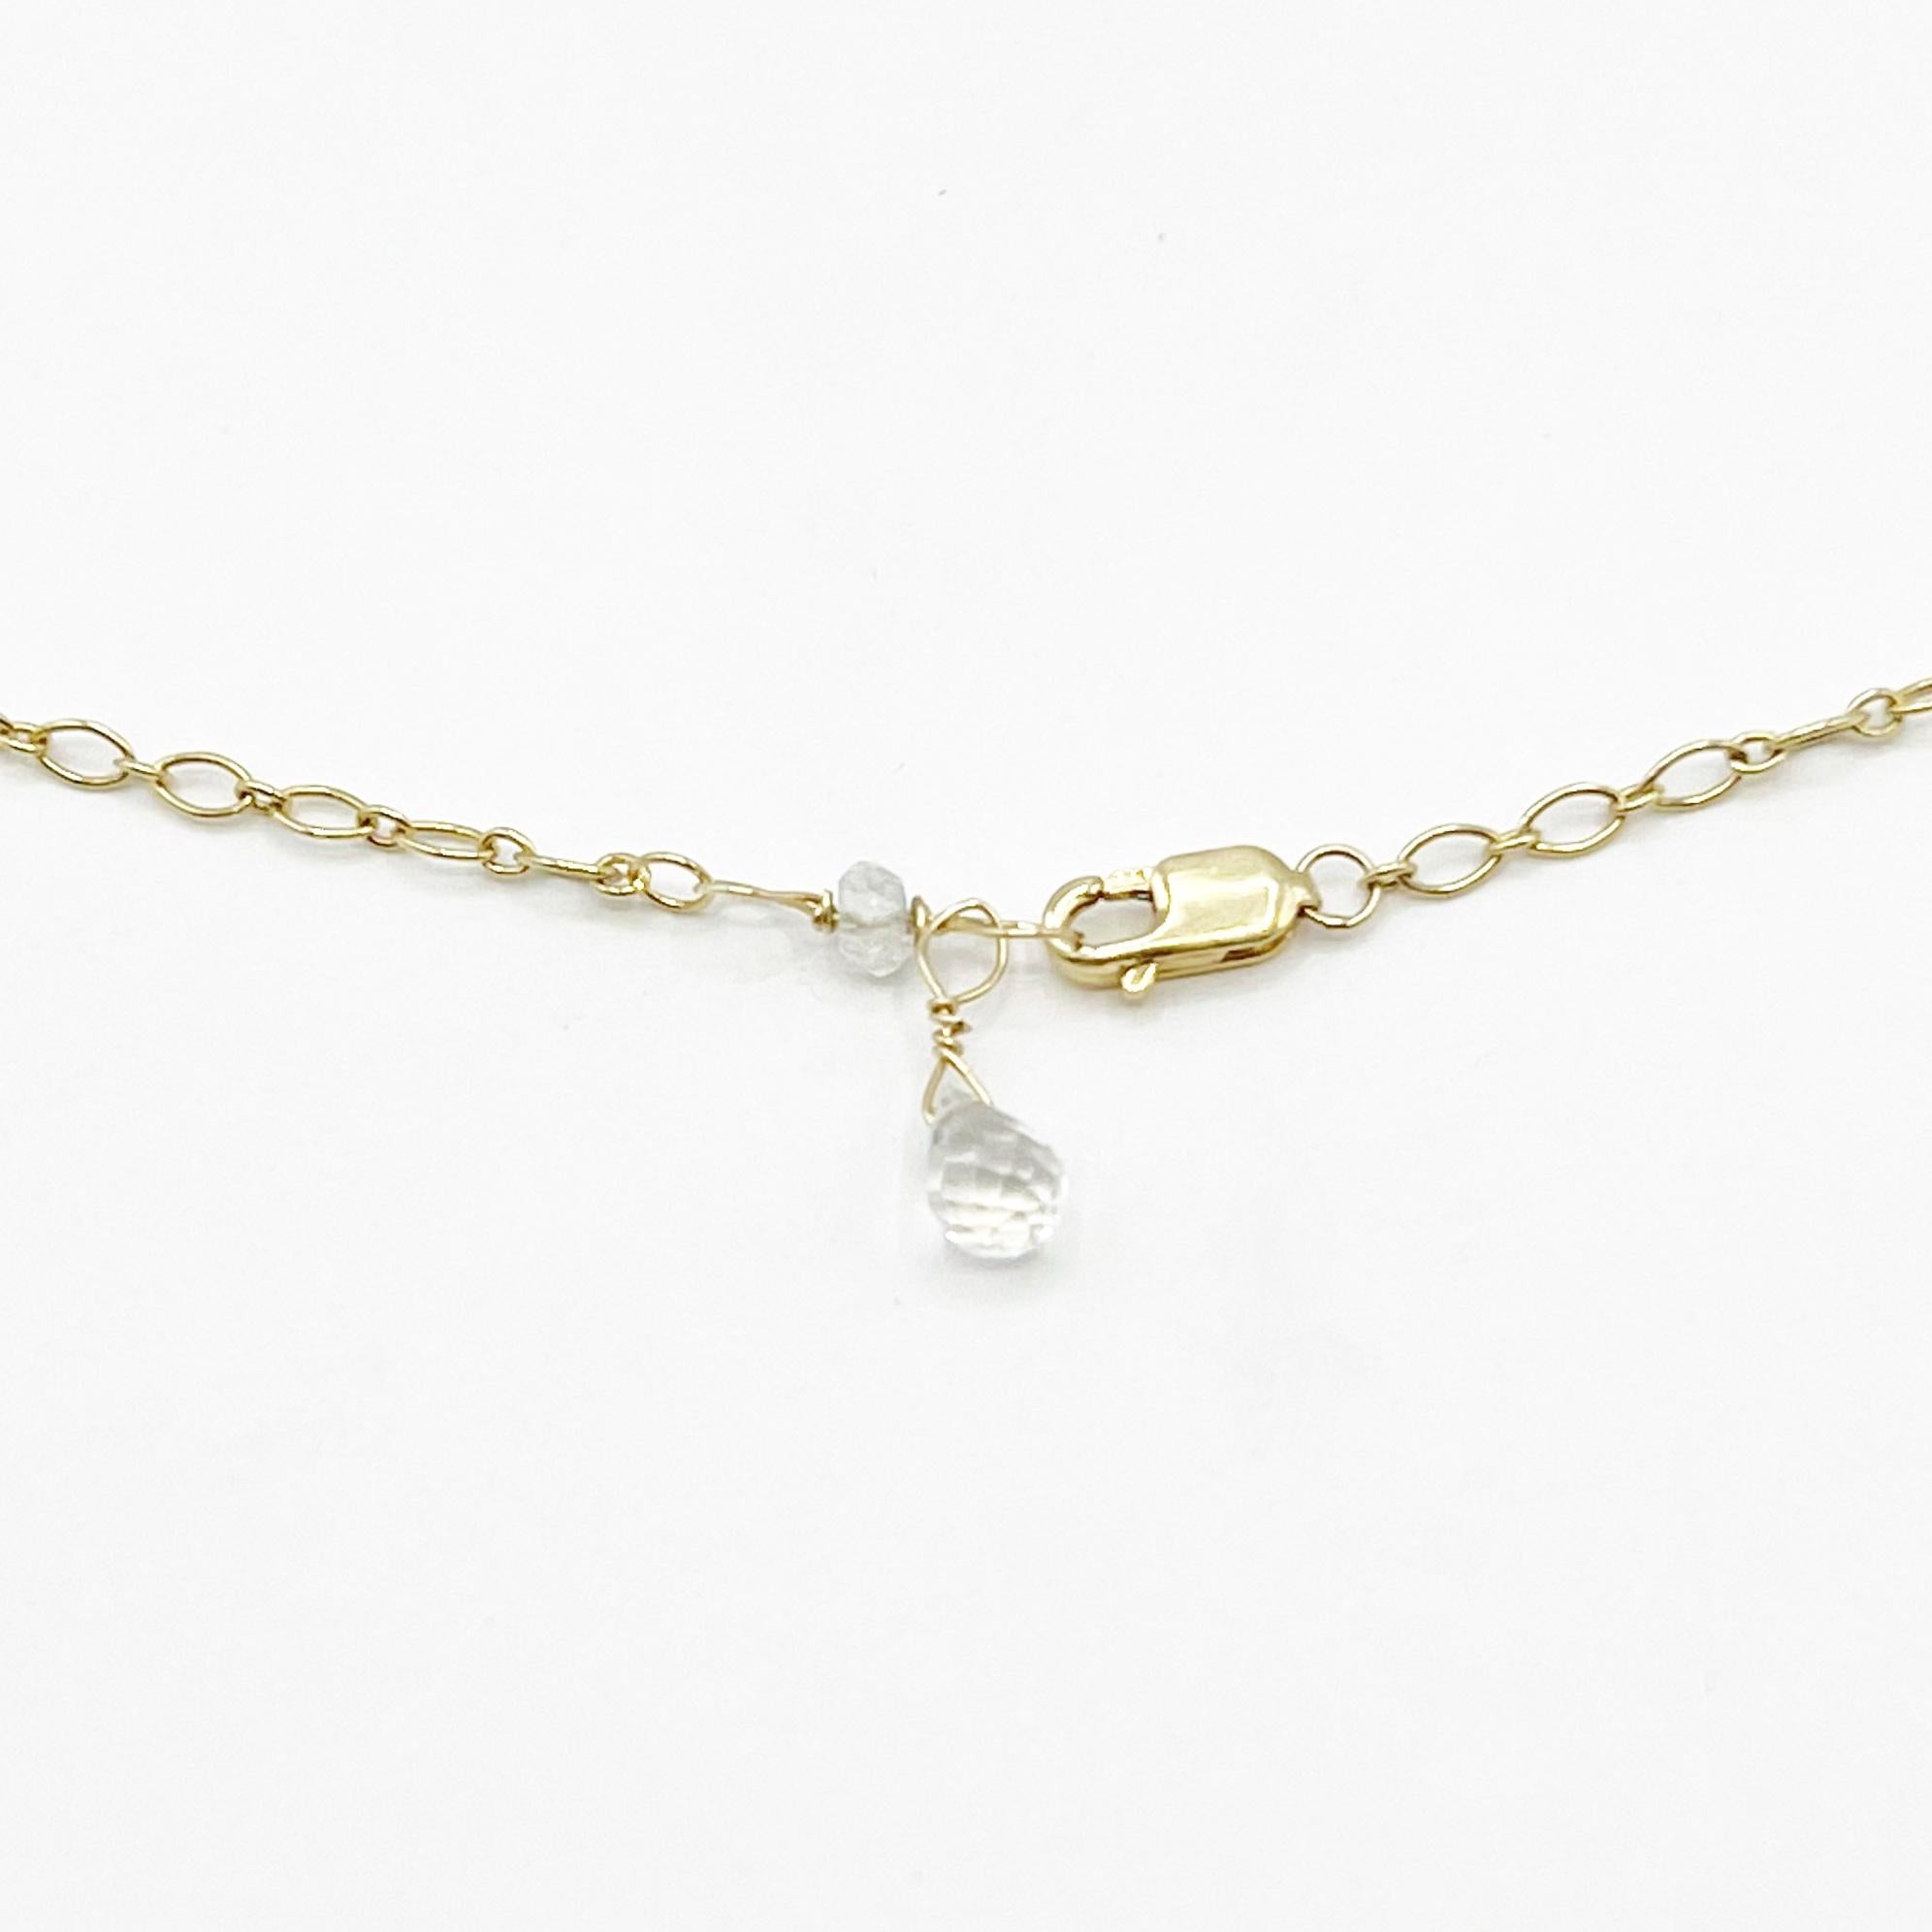 Moonstone Rose Cut Graduated Stones Set in 14 Karat Gold Necklace In New Condition For Sale In Berkeley, CA